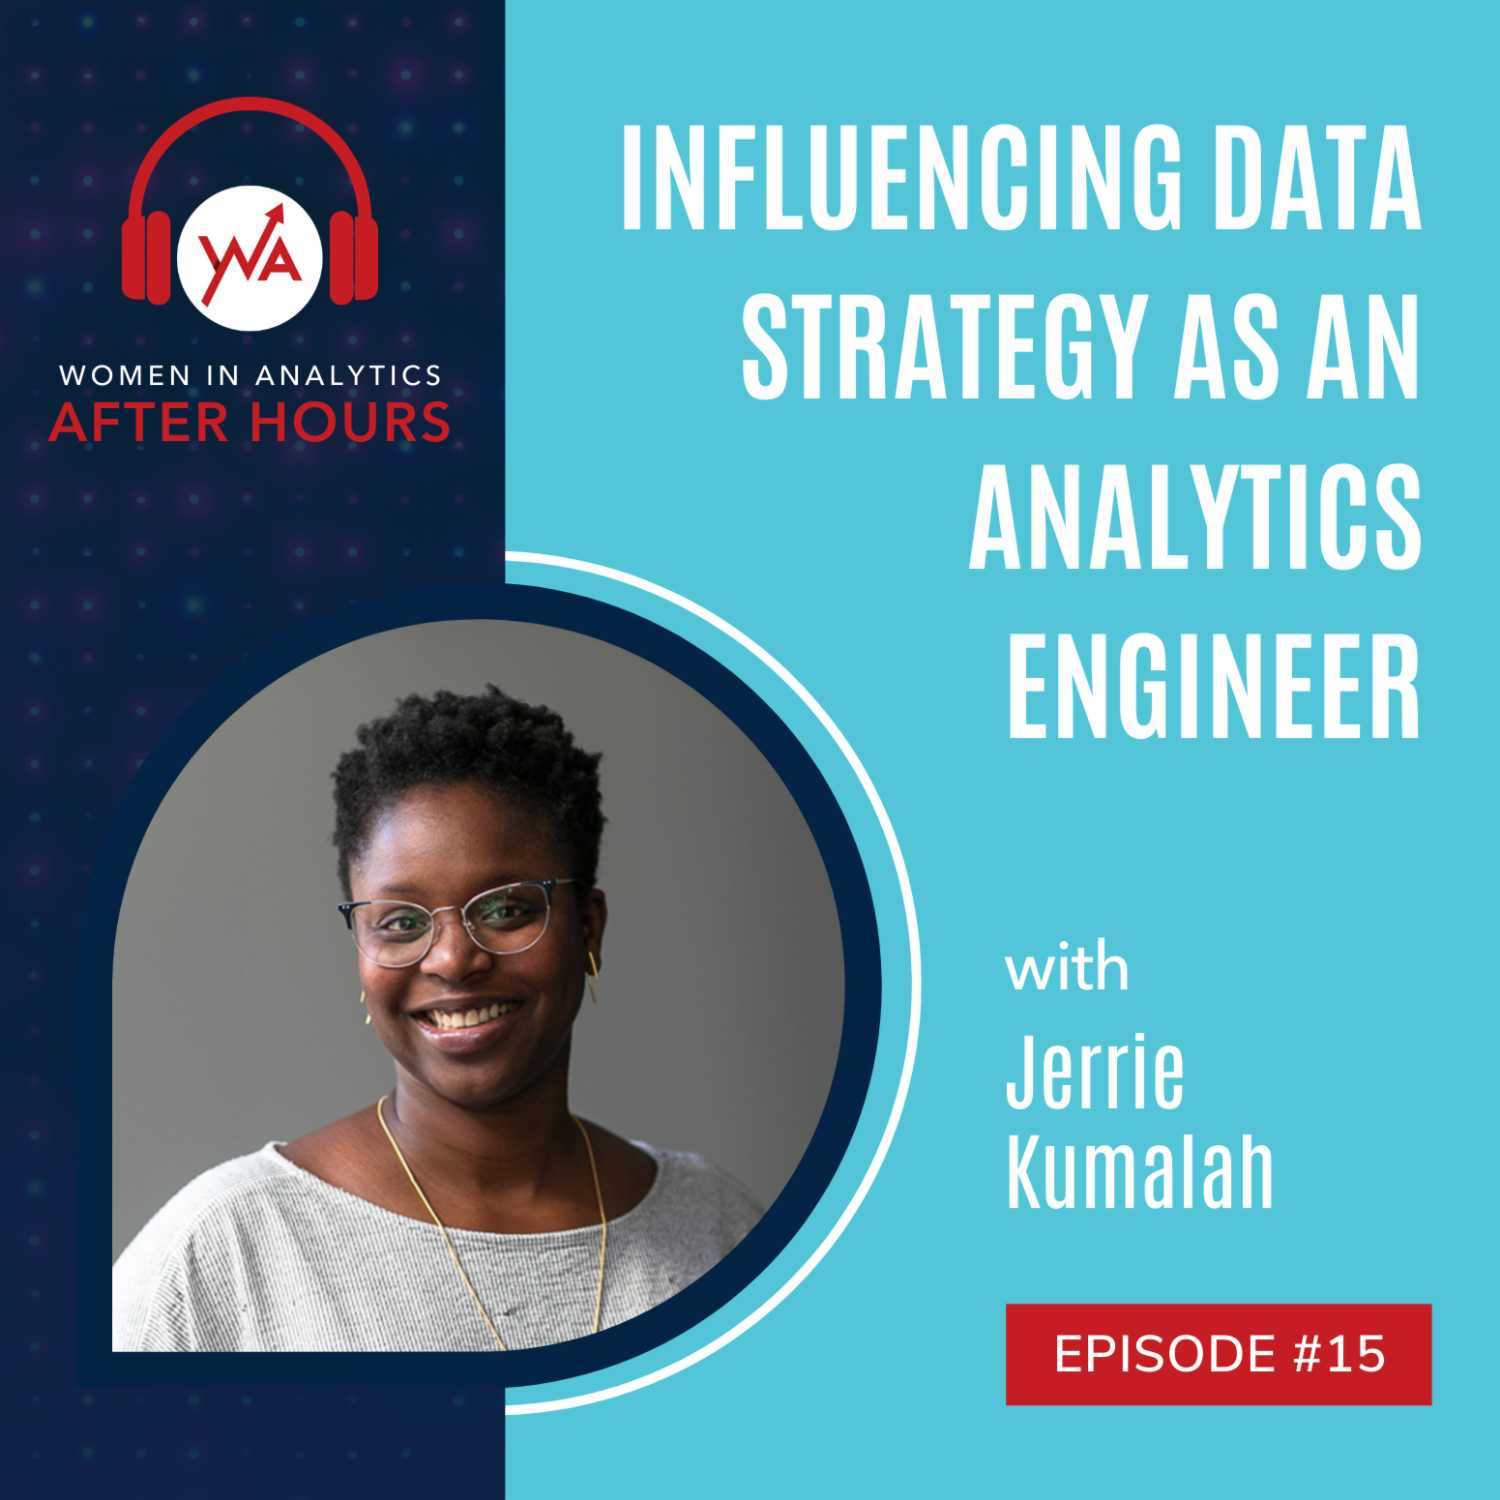 Episode 15: Influencing Data Strategy as an Analytics Engineer with Jerrie Kumalah